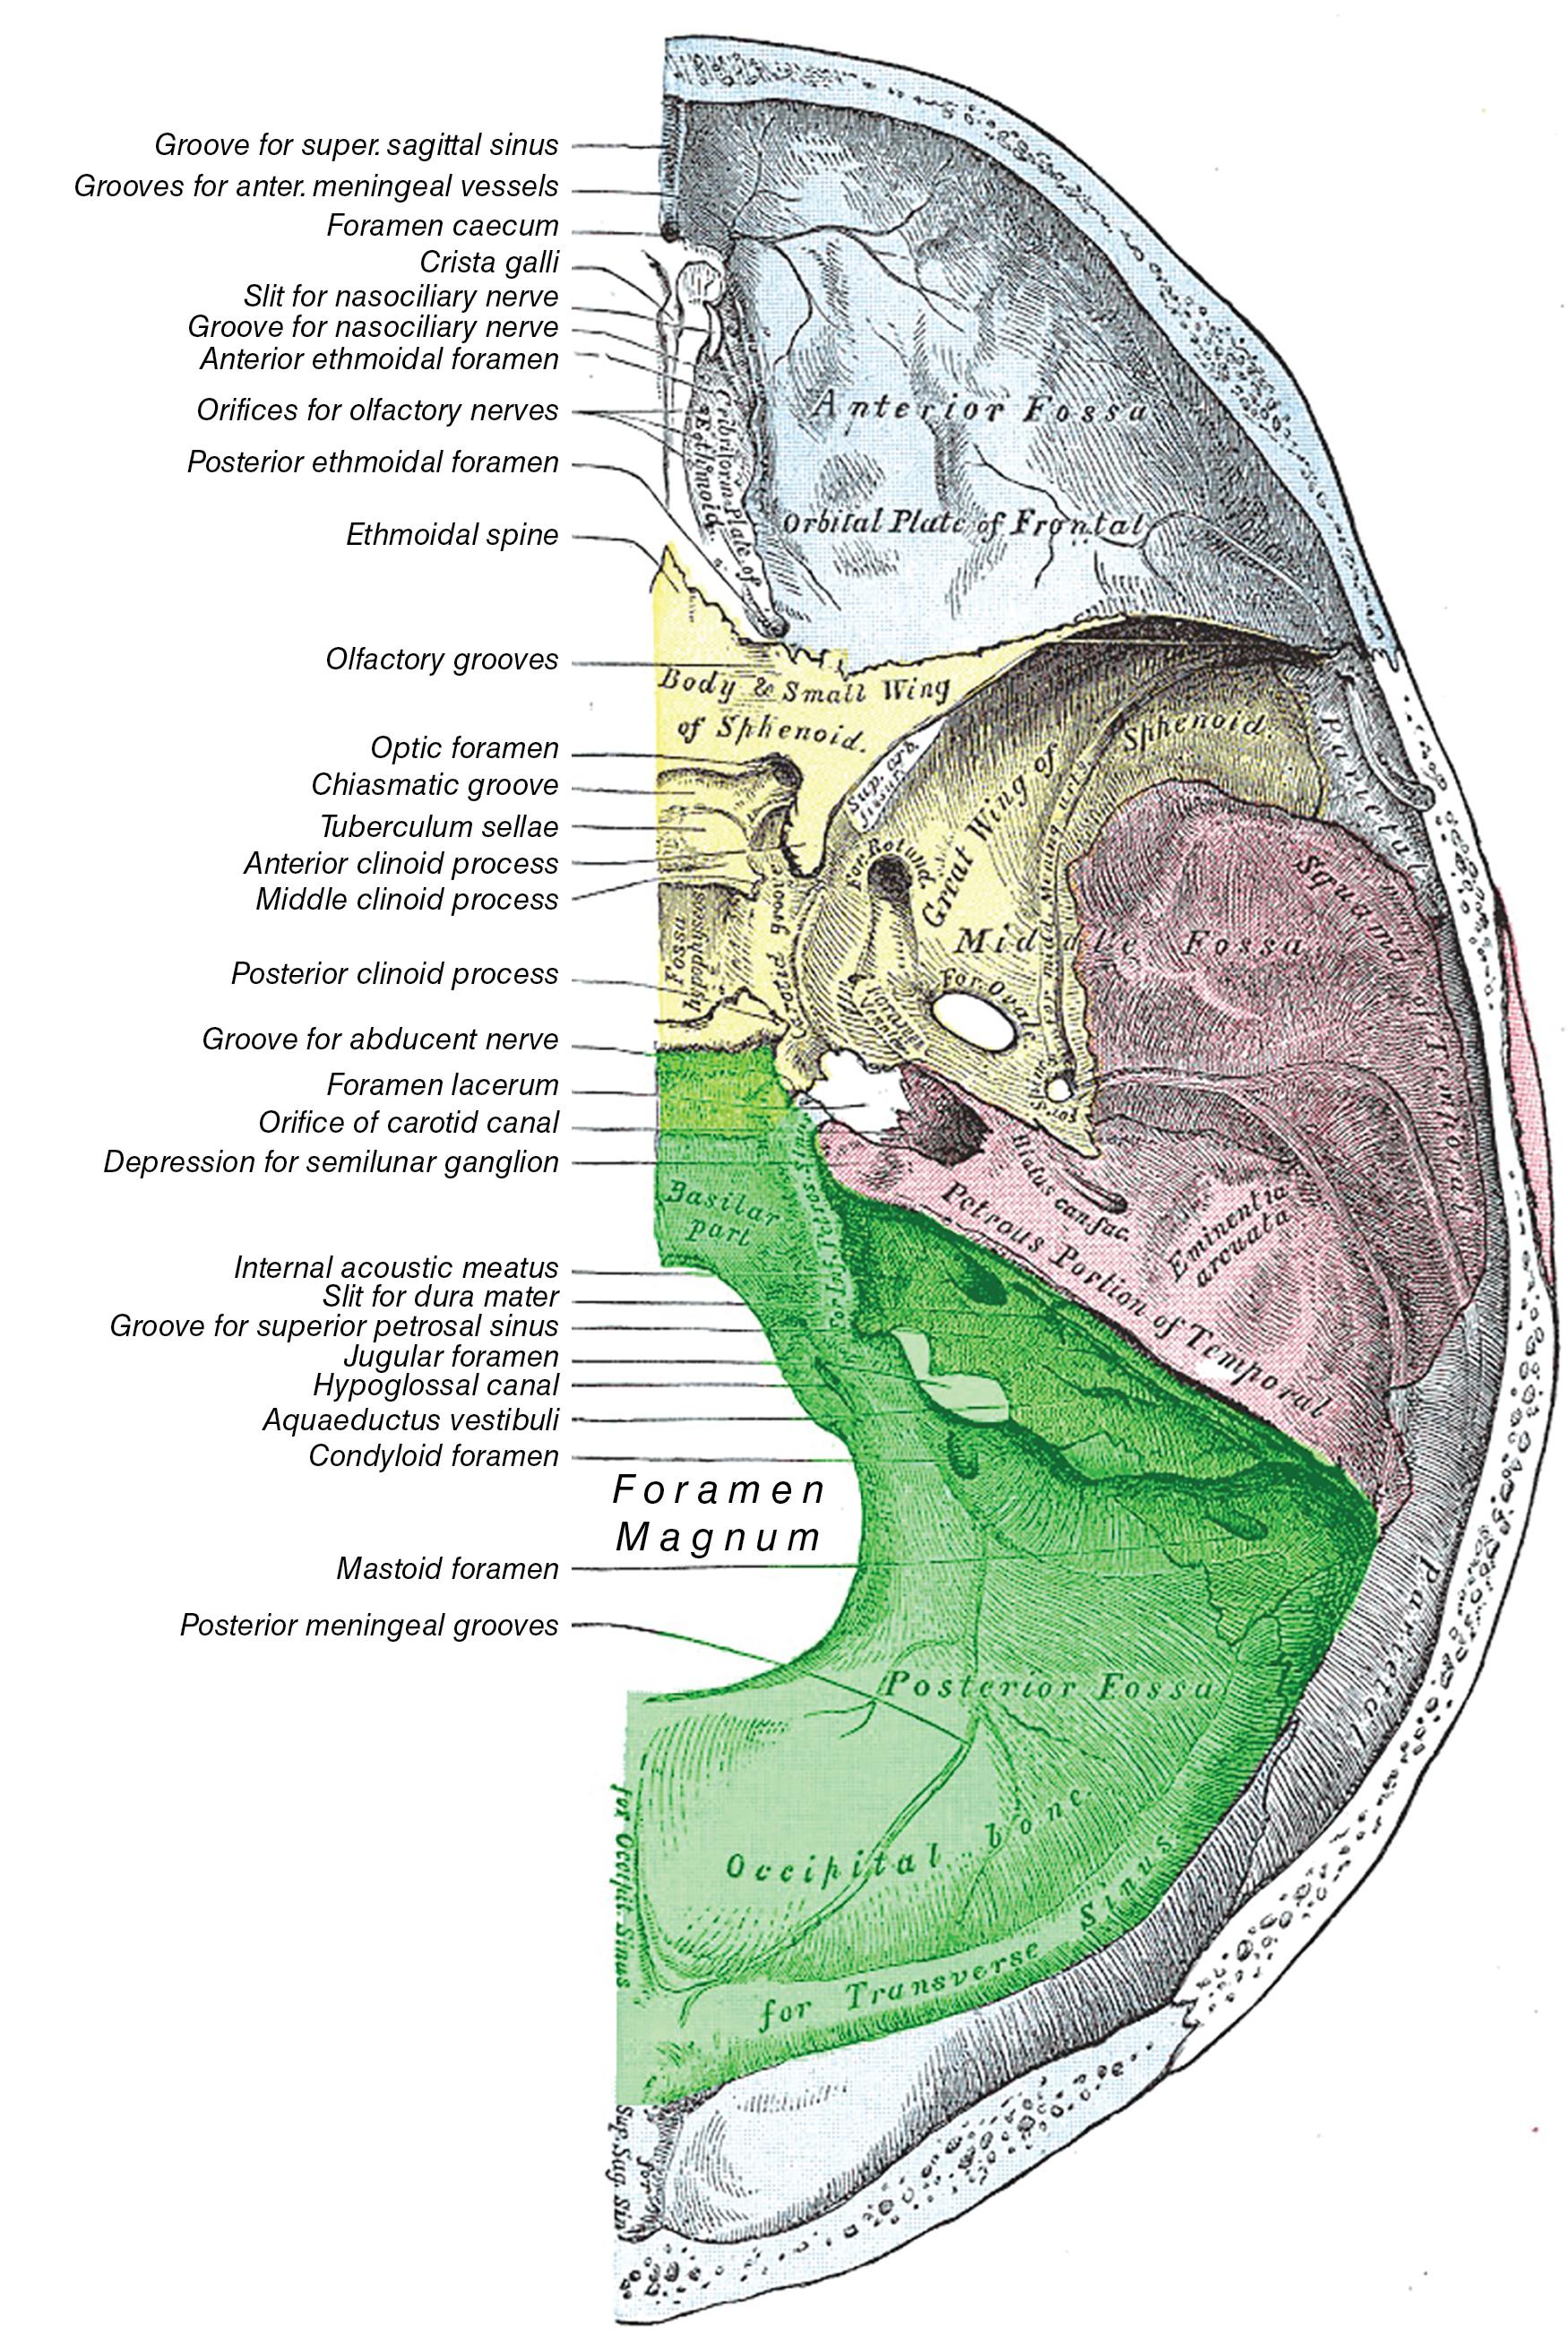 Fig. 8.1, Superior view of skull base demonstrating bony borders and foramina of the posterior fossa.